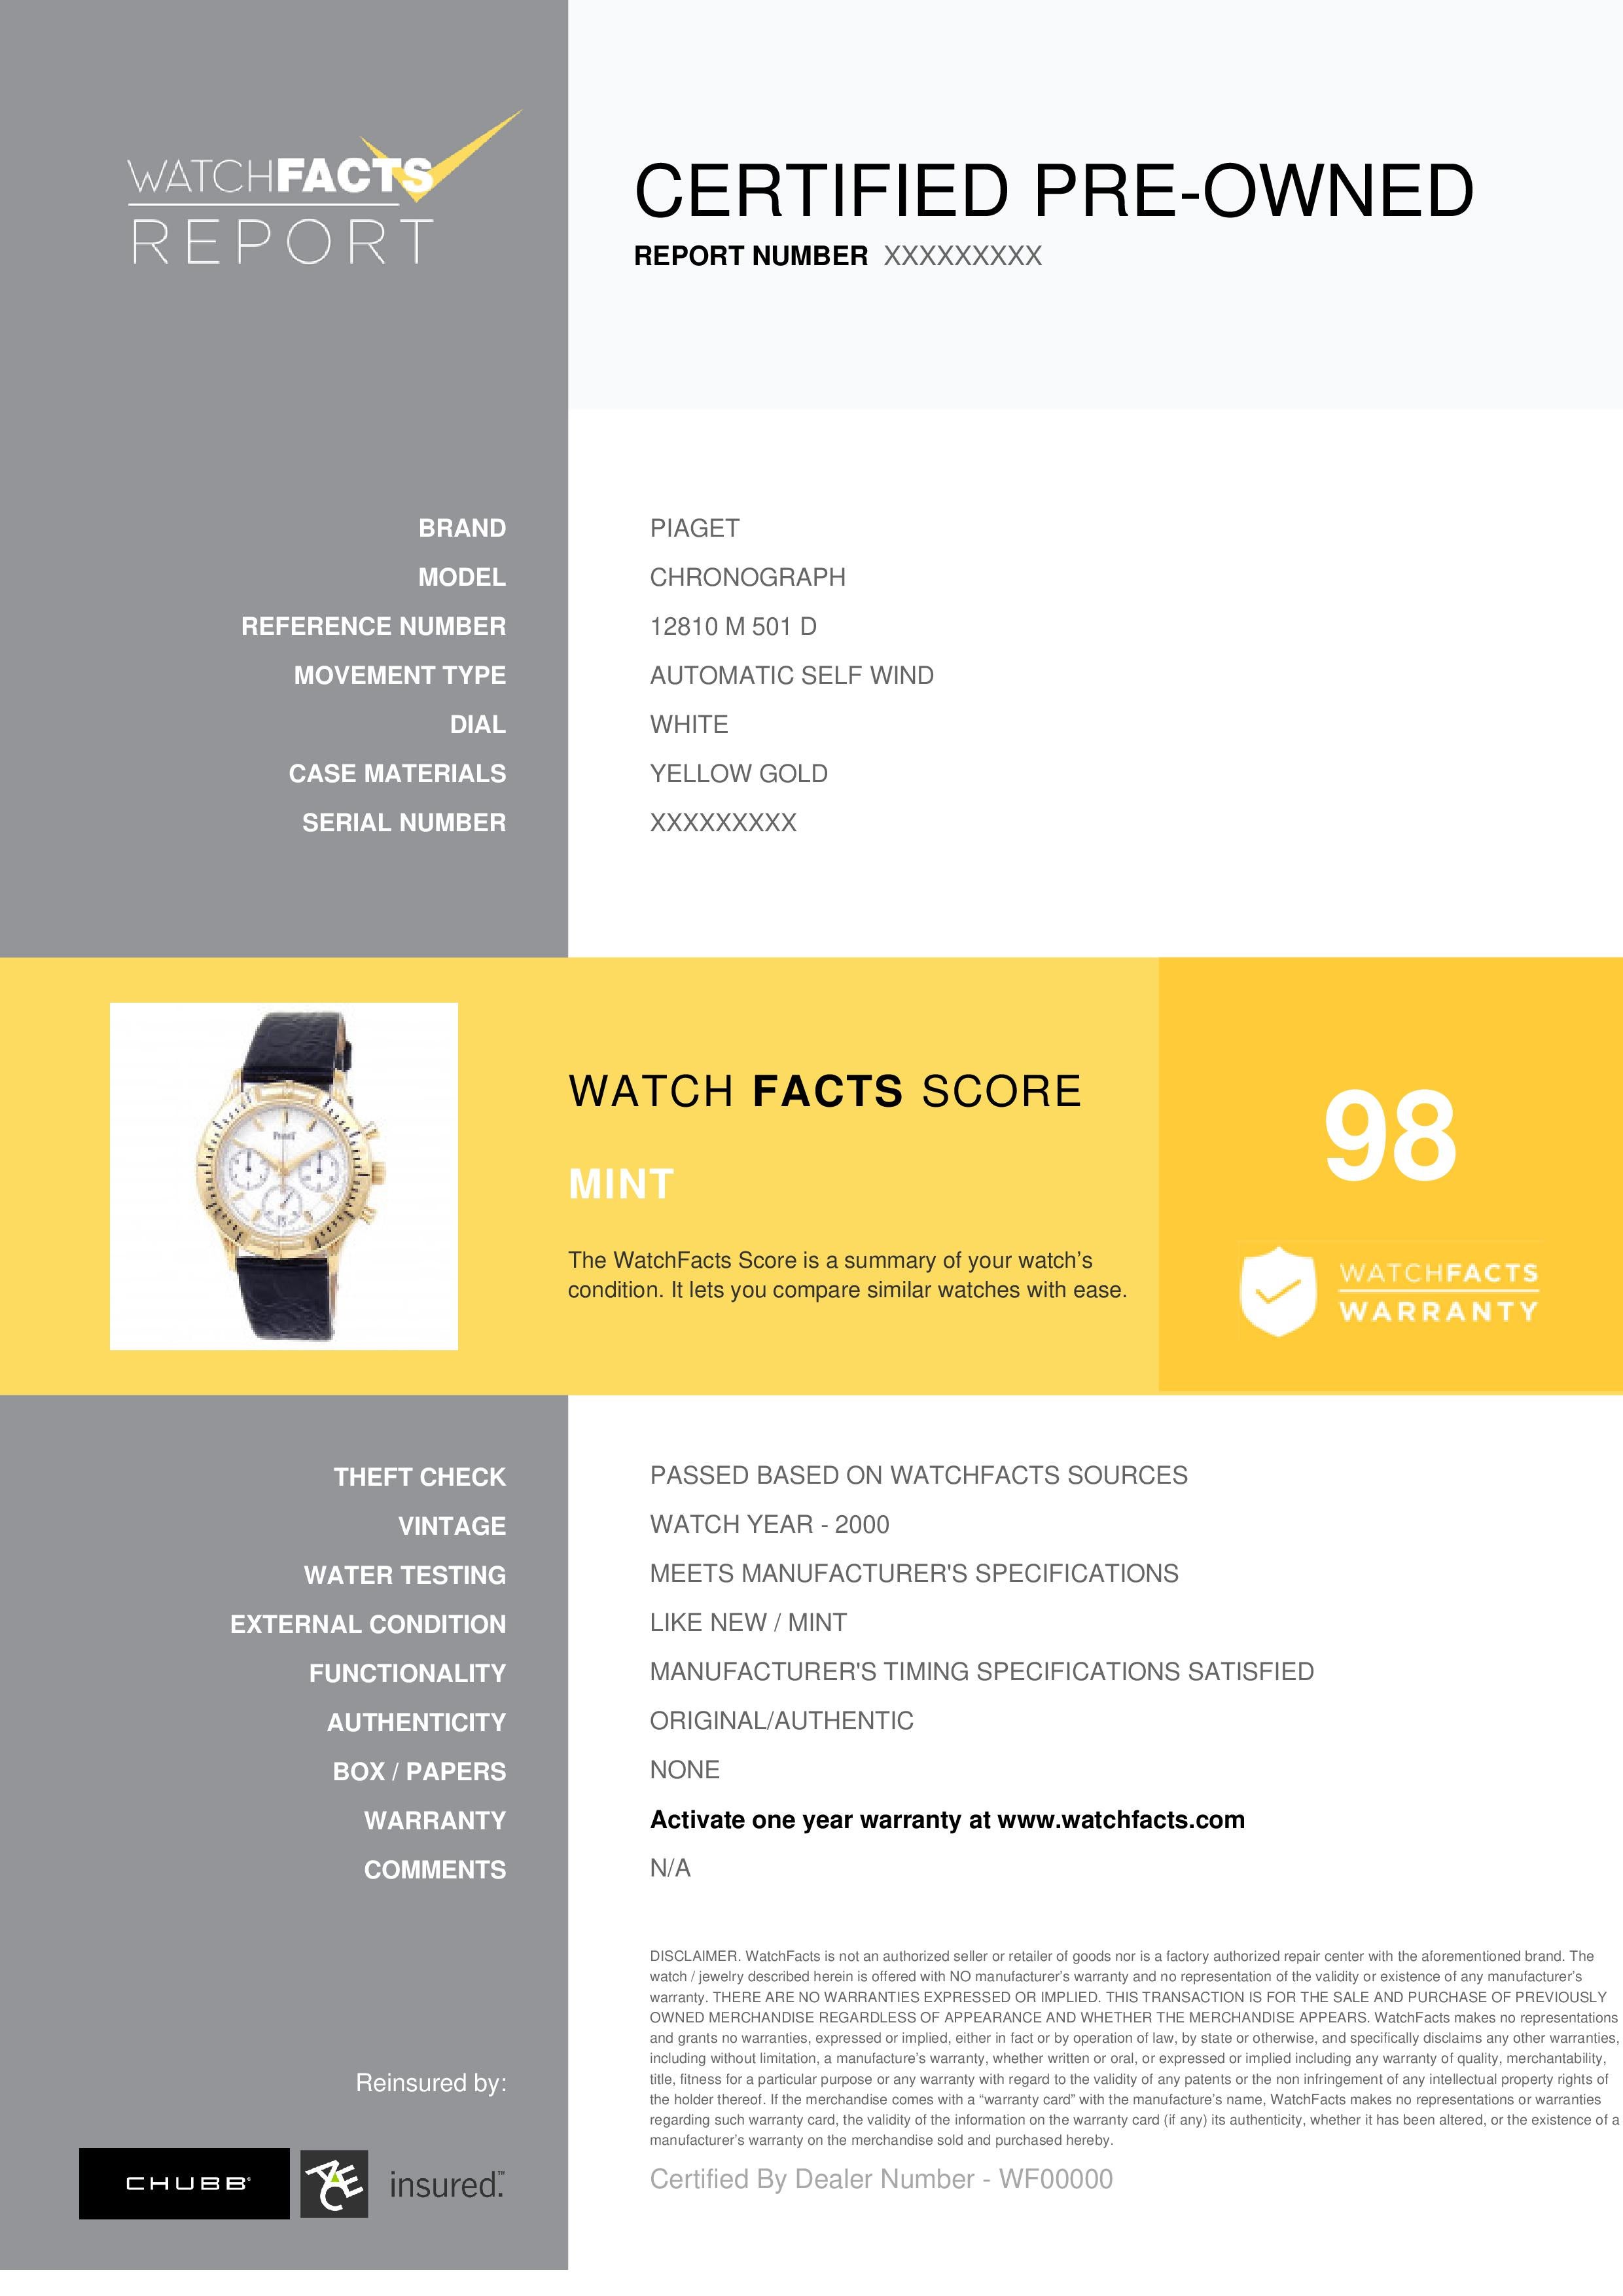 Piaget Chronograph Reference #: 12810 M 501 D. Mens Automatic Self Wind Watch Yellow Gold White 35 MM. Verified and Certified by WatchFacts. 1 year warranty offered by WatchFacts.
